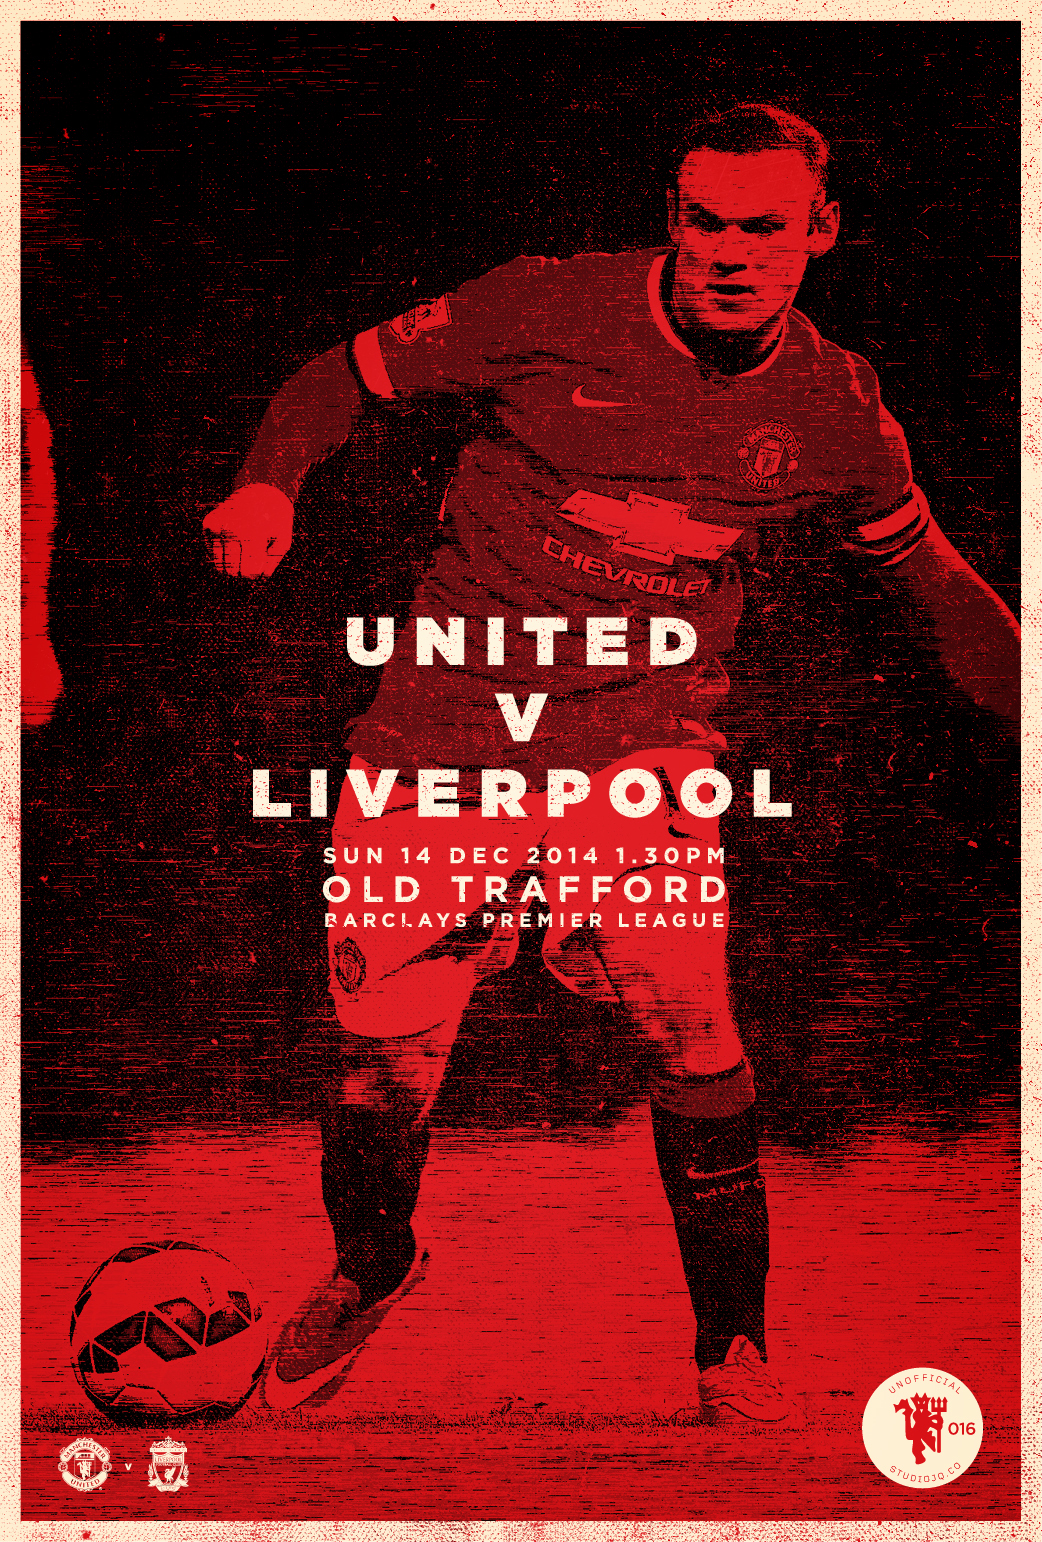 Manchester United man utd united football red poster clean texture soccer abstract